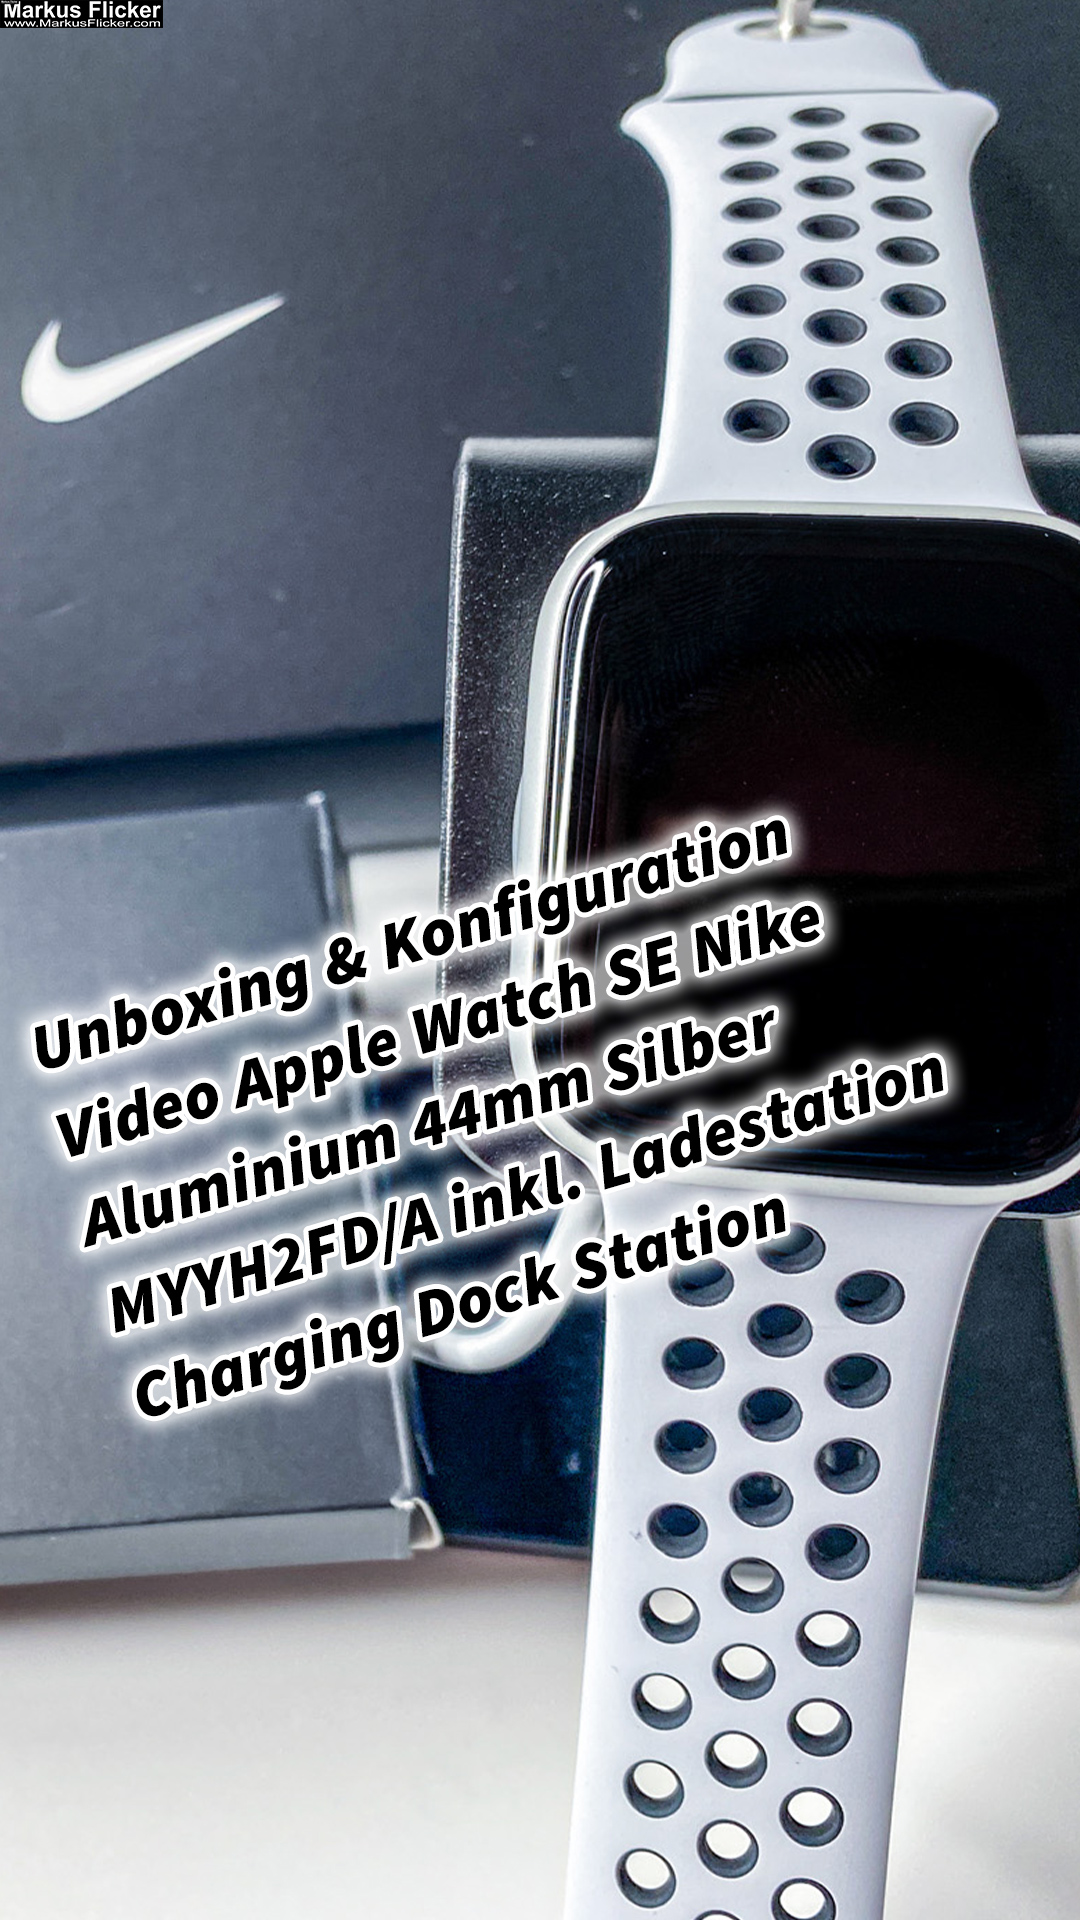 Unboxing & Konfiguration Video Apple Watch SE Nike Aluminium 44mm Silber MYYH2FD/A inkl. Ladestation Charging Dock Station